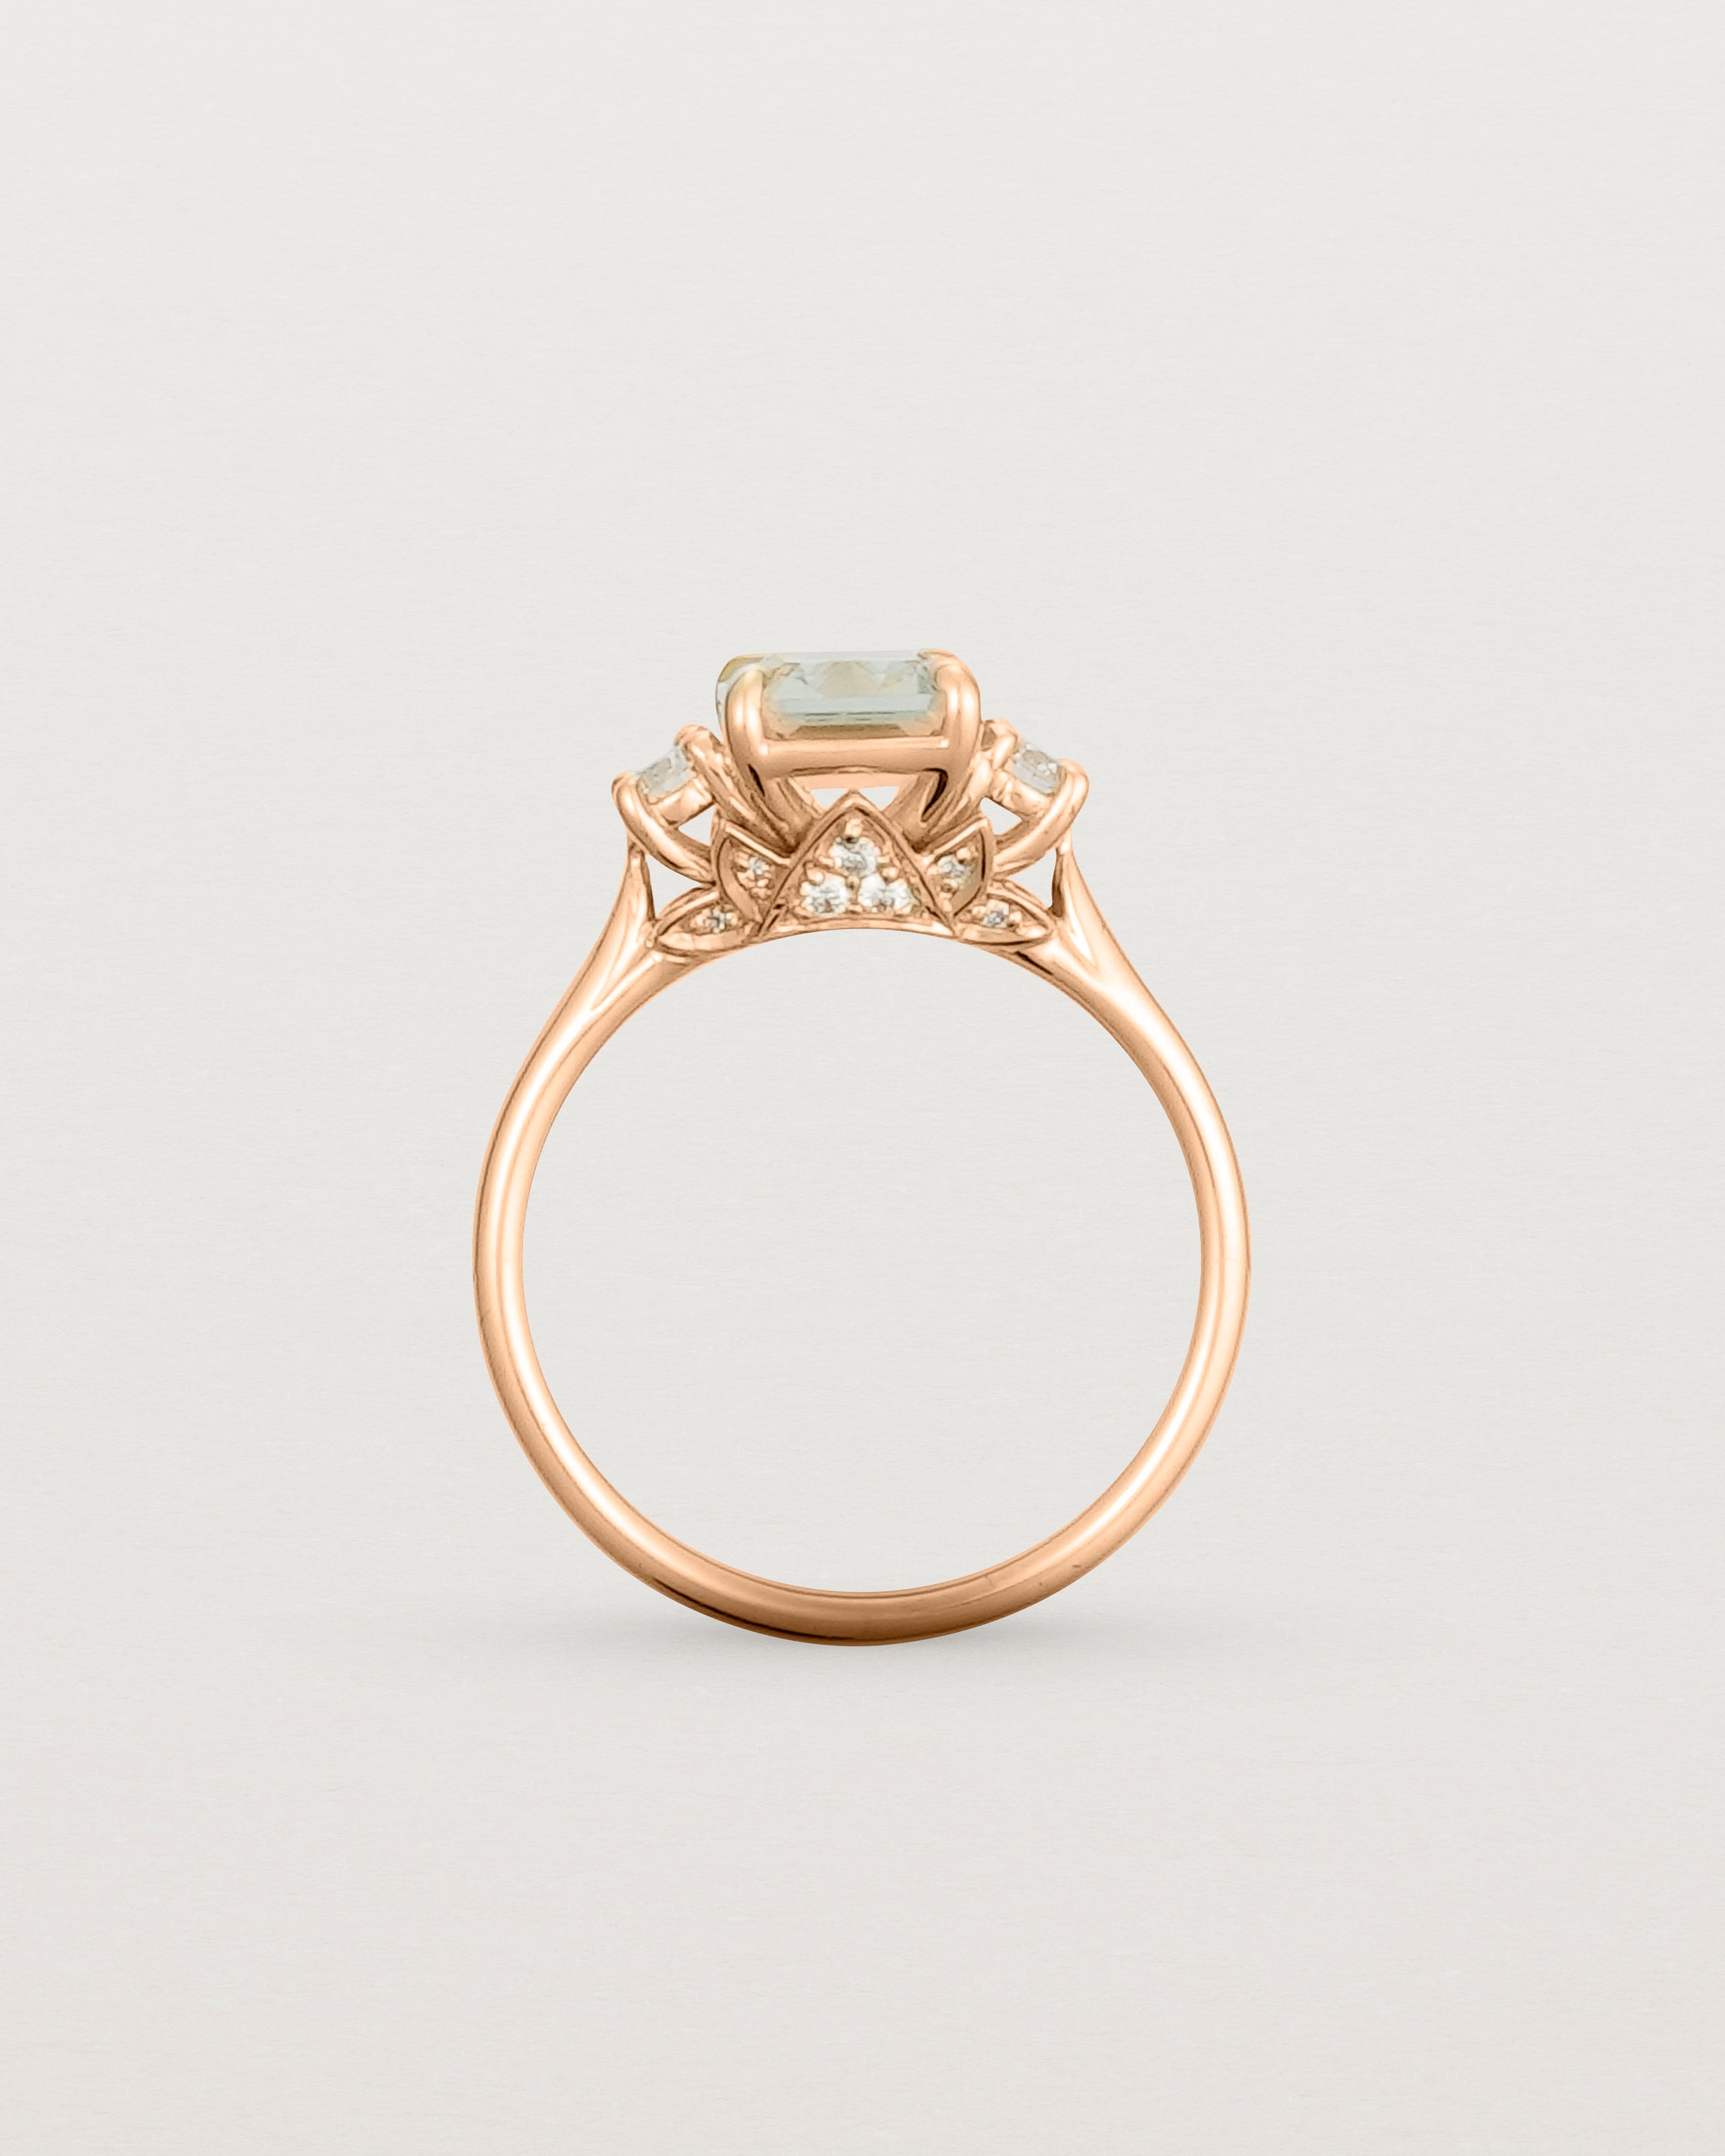 Standing view of the Laurel Emerald Trio Ring | Green Amethyst | Rose Gold.